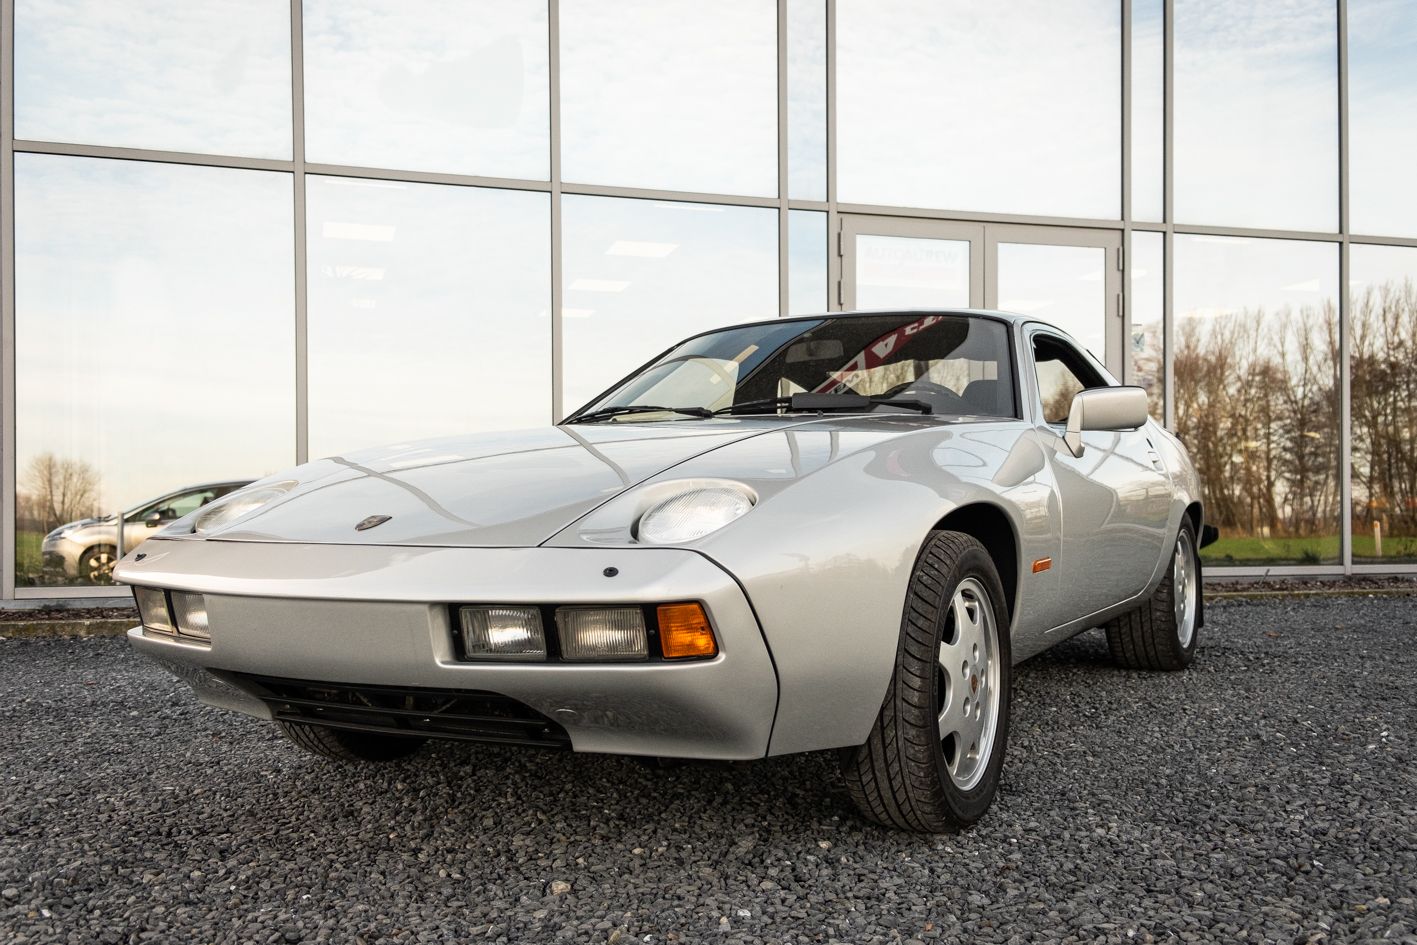 Porsche 928 
Porsche 928 4.5 V8 





This lot is one of the first 928's ever to&hellip;